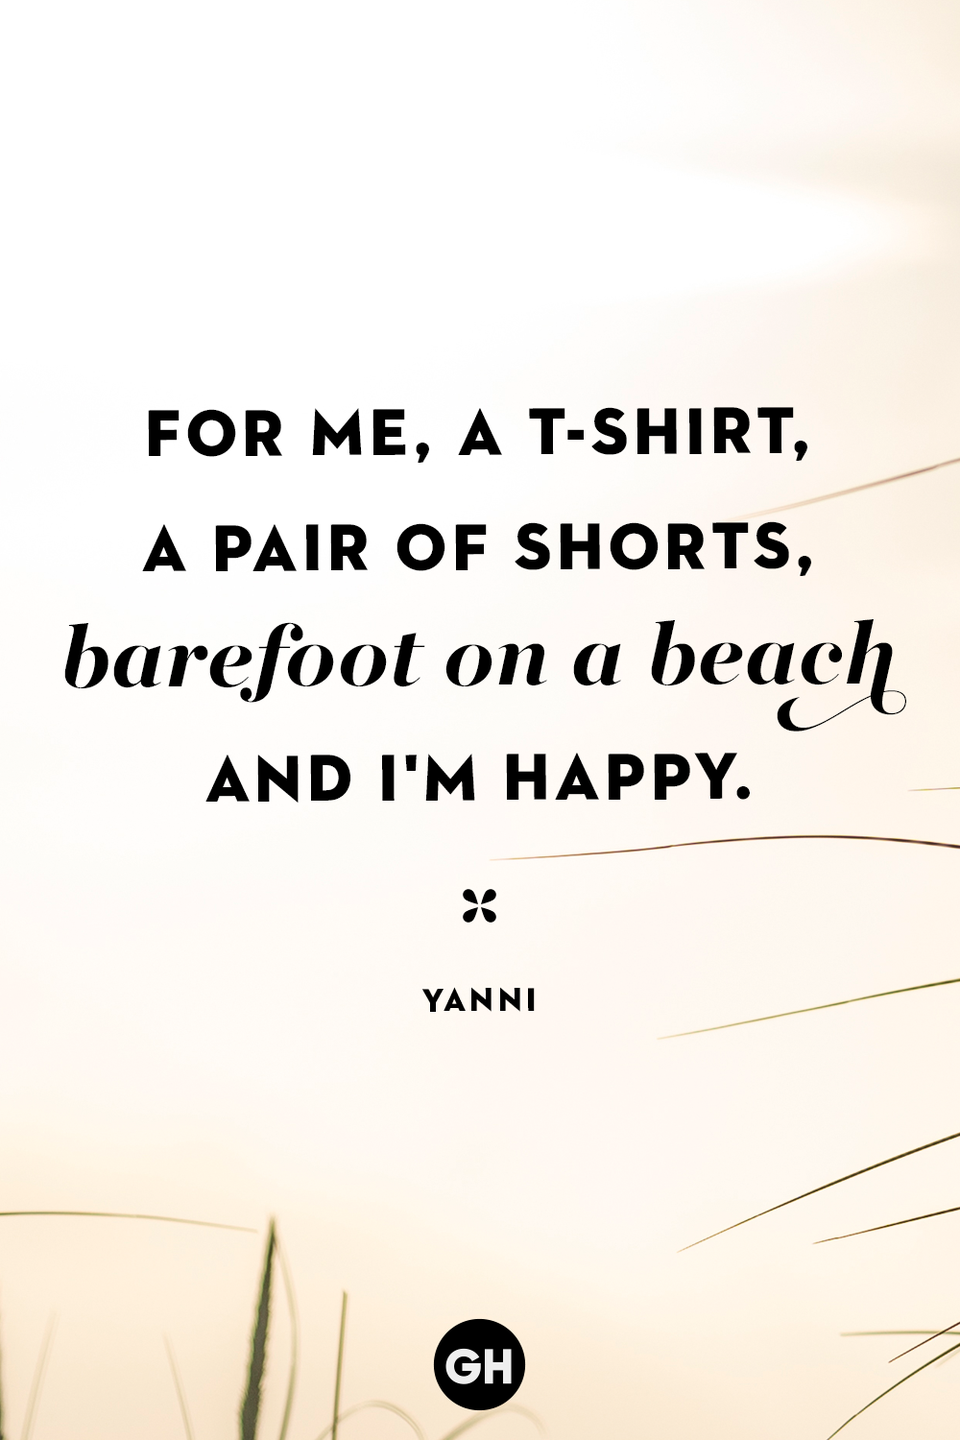 <p>For me, a T-shirt, a pair of shorts, barefoot on a beach and I'm happy.</p>